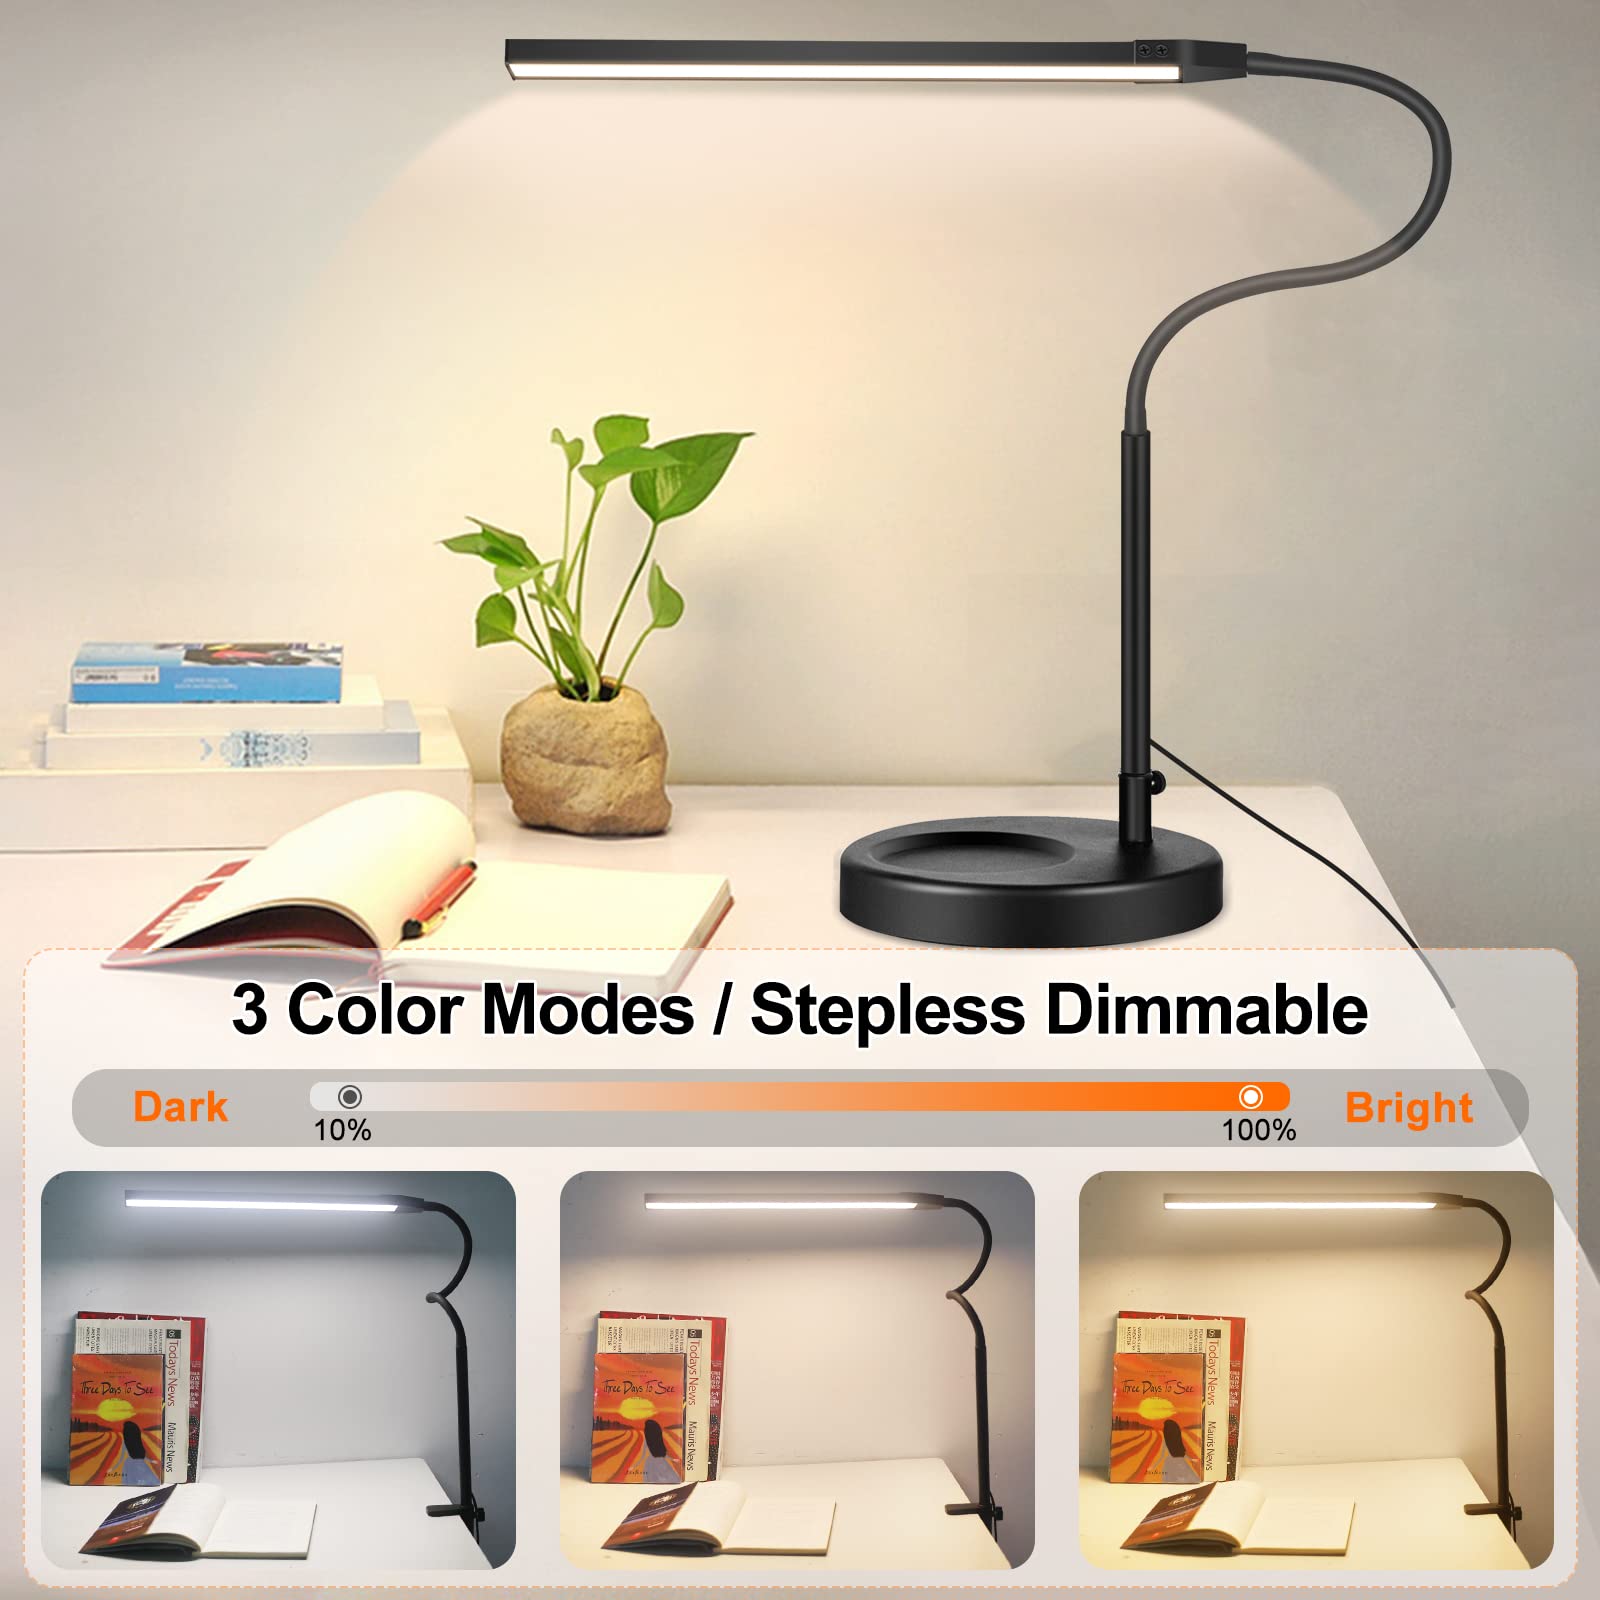 Touch Control LED Desk Lamp, 2-in-1 Gooseneck Clamp on Lamp, Desk Lamp for Home Office, 3 Modes Stepless Dimmable Workbench Light for Painting Reading Working Study Dorms Nightlight